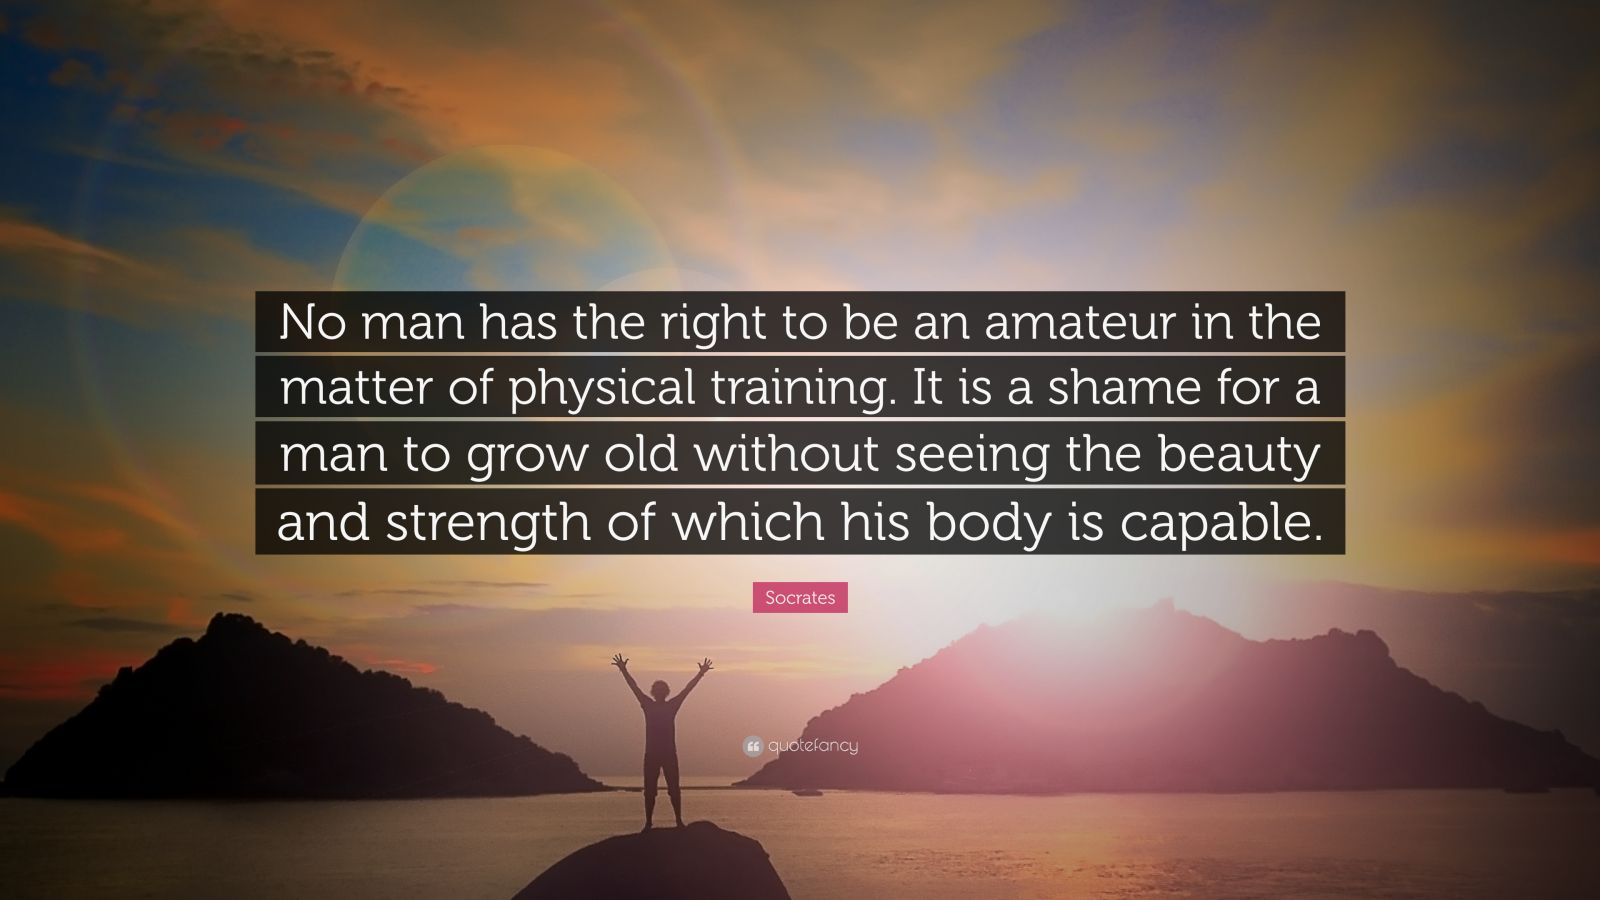 Motivational Quotes “No man has the right to be an amateur in the matter